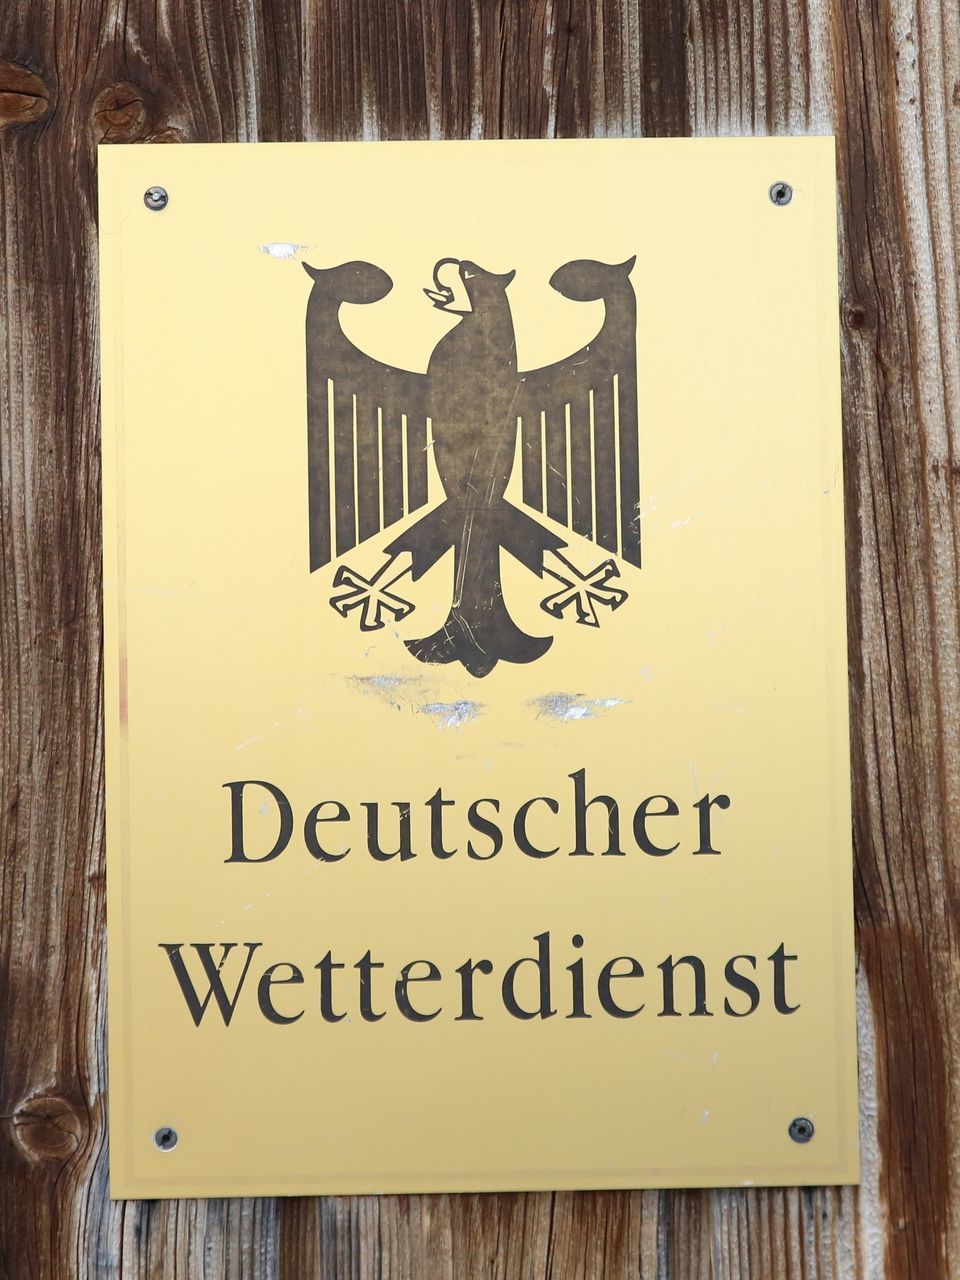 CLOSE-UP OF WARNING SIGN ON WOODEN WOOD